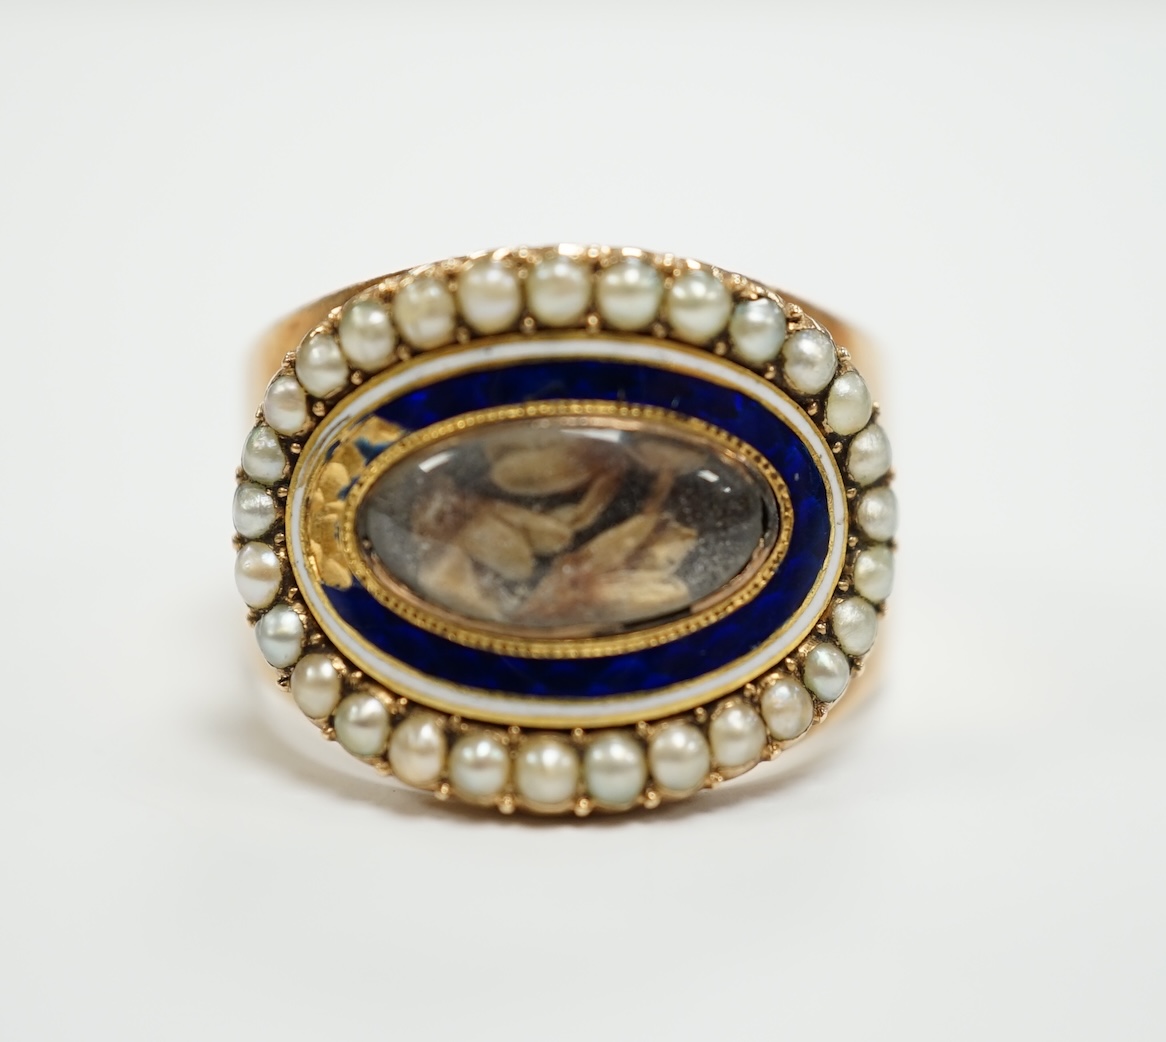 A George III yellow metal, enamel and split pearl set mourning ring, with central glazed panel and engraved inscription, 'Mary Daniels Obt. June, 1764 at 40 Willm Daniels obt 18 June, 1793 at 80', size R, gross weight 7.